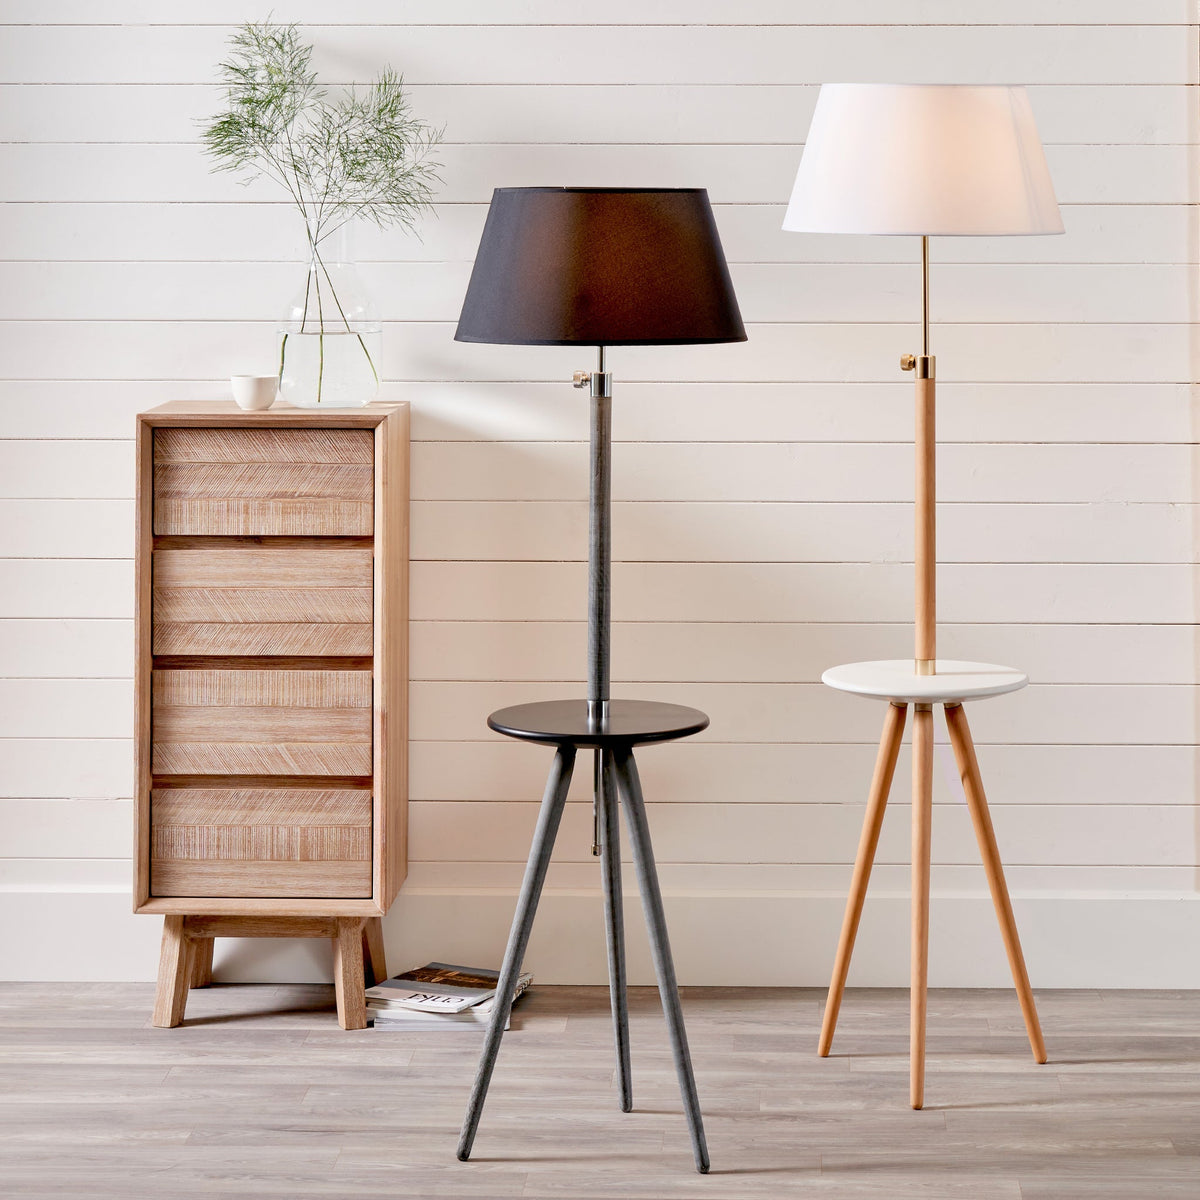 Malmo Grey Wood with Black Table Floor Lamp lifestyle